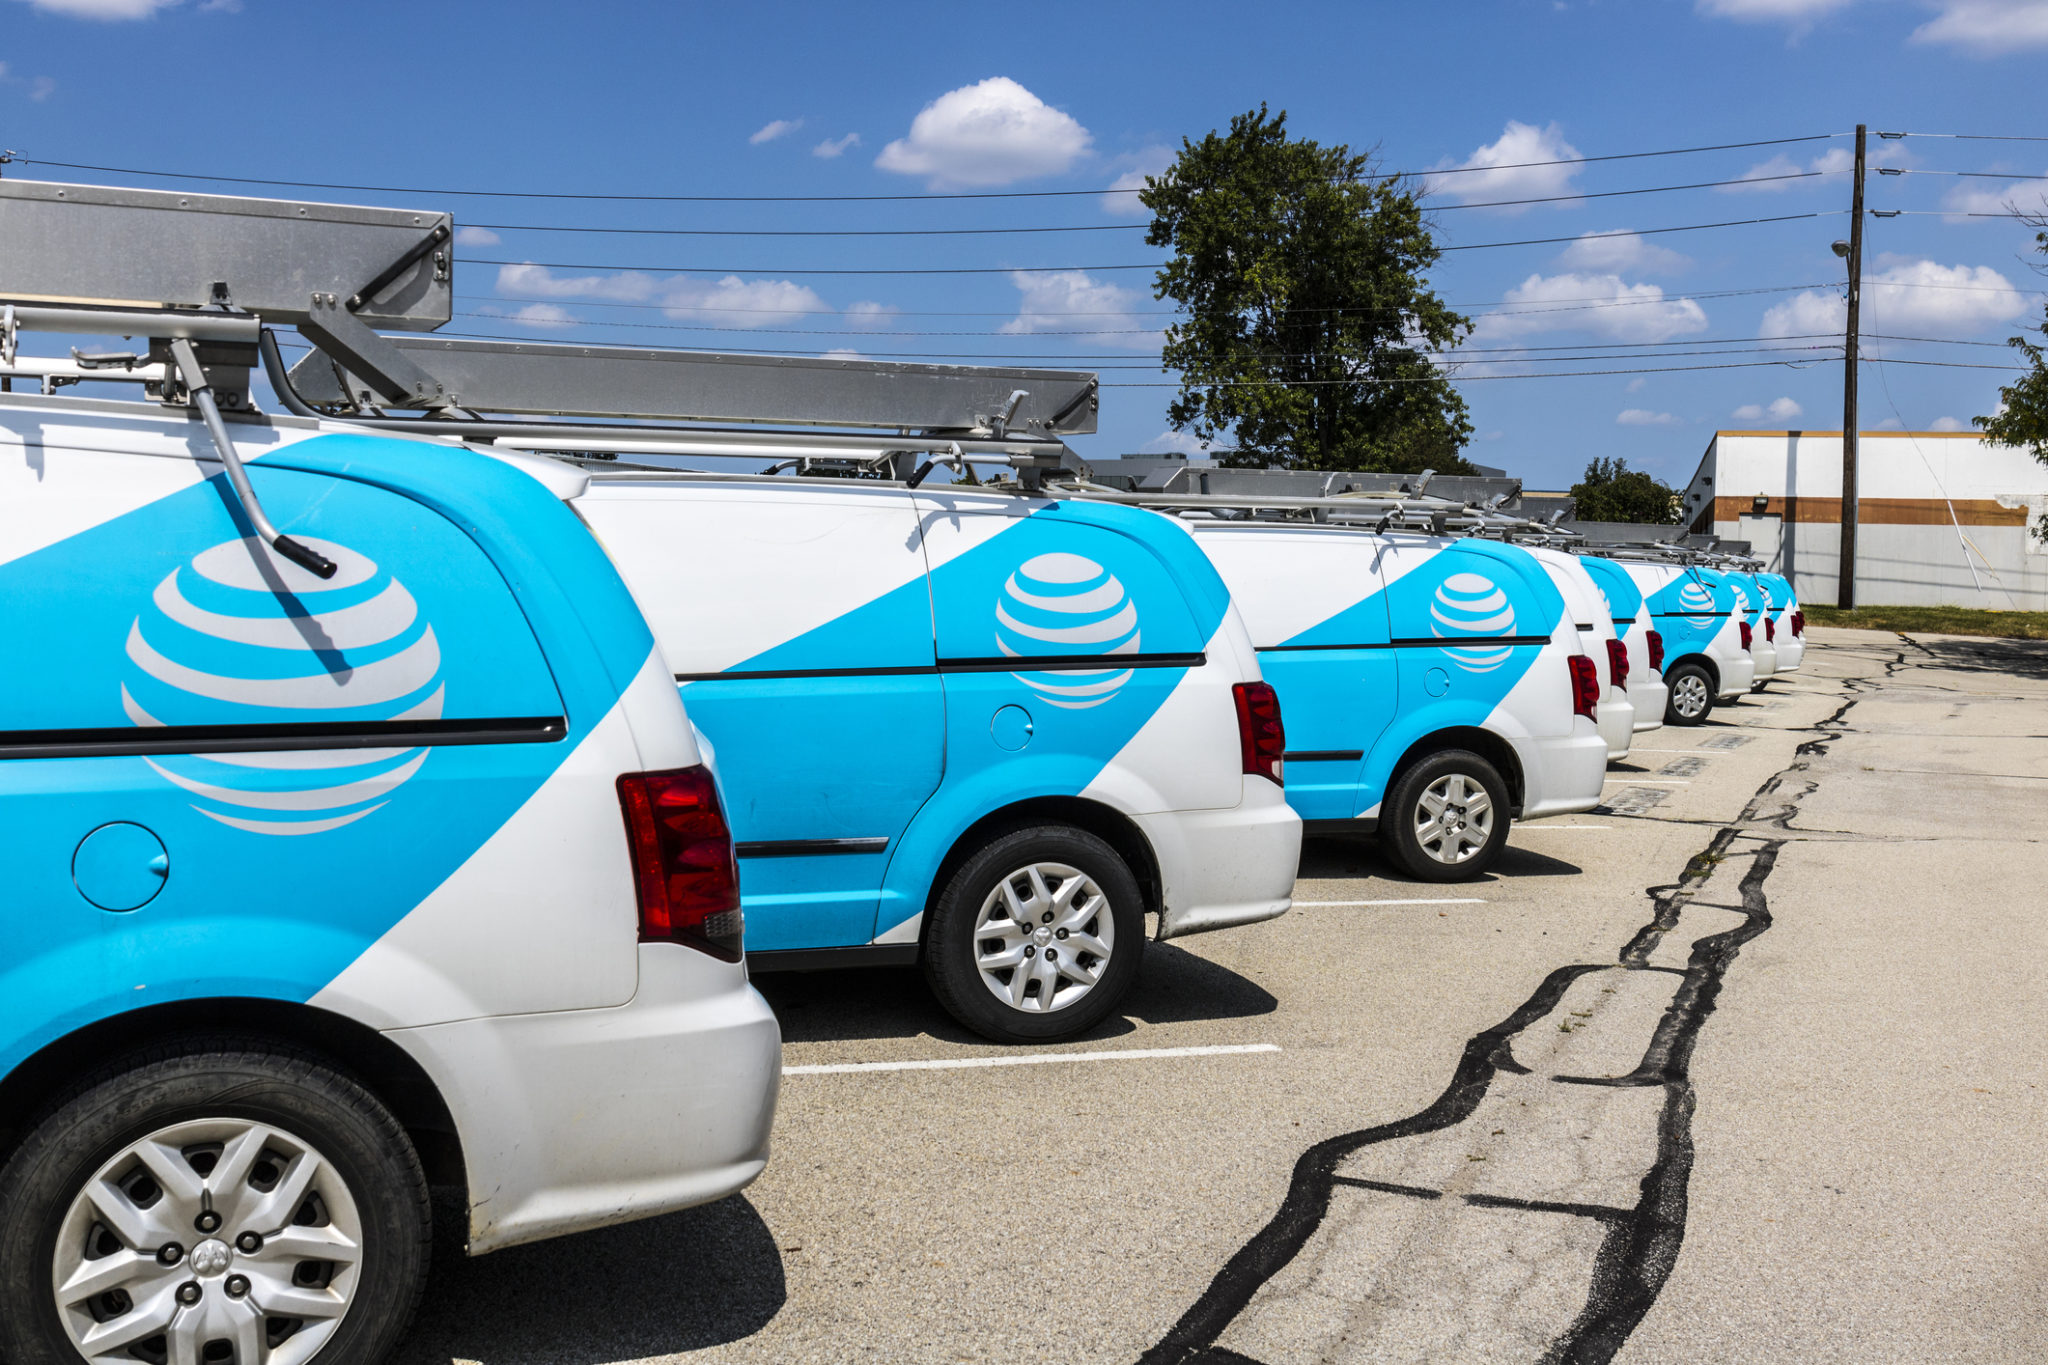 AT&T Wants Big Tech Like Google & Netflix To Pay For a Rural Internet Rollout